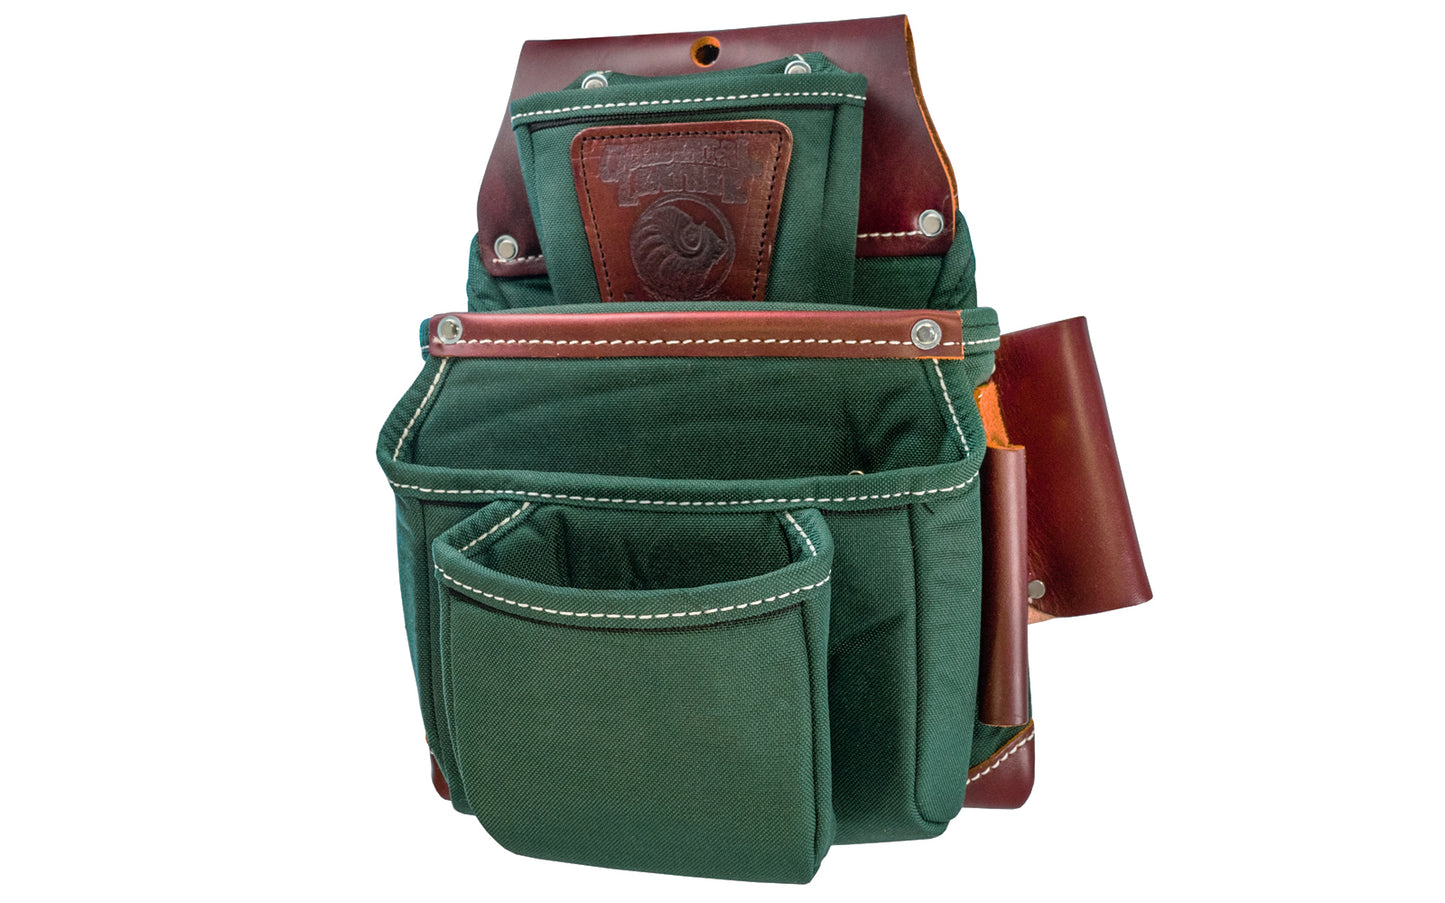 Occidental Leather "Oxy Lights" 4-Pouch Tool Bag ~ 8062 - Fits 3" work belt - Green Pouch - 4-pouch tool bag features holders for pencils, work knife, chisel, level, lumber crayon, hammer loop. Tool bag corners are reinforced with Occidental's "OxyRed" leather. Nylon & genuine Leather - Green Color - 759244088502